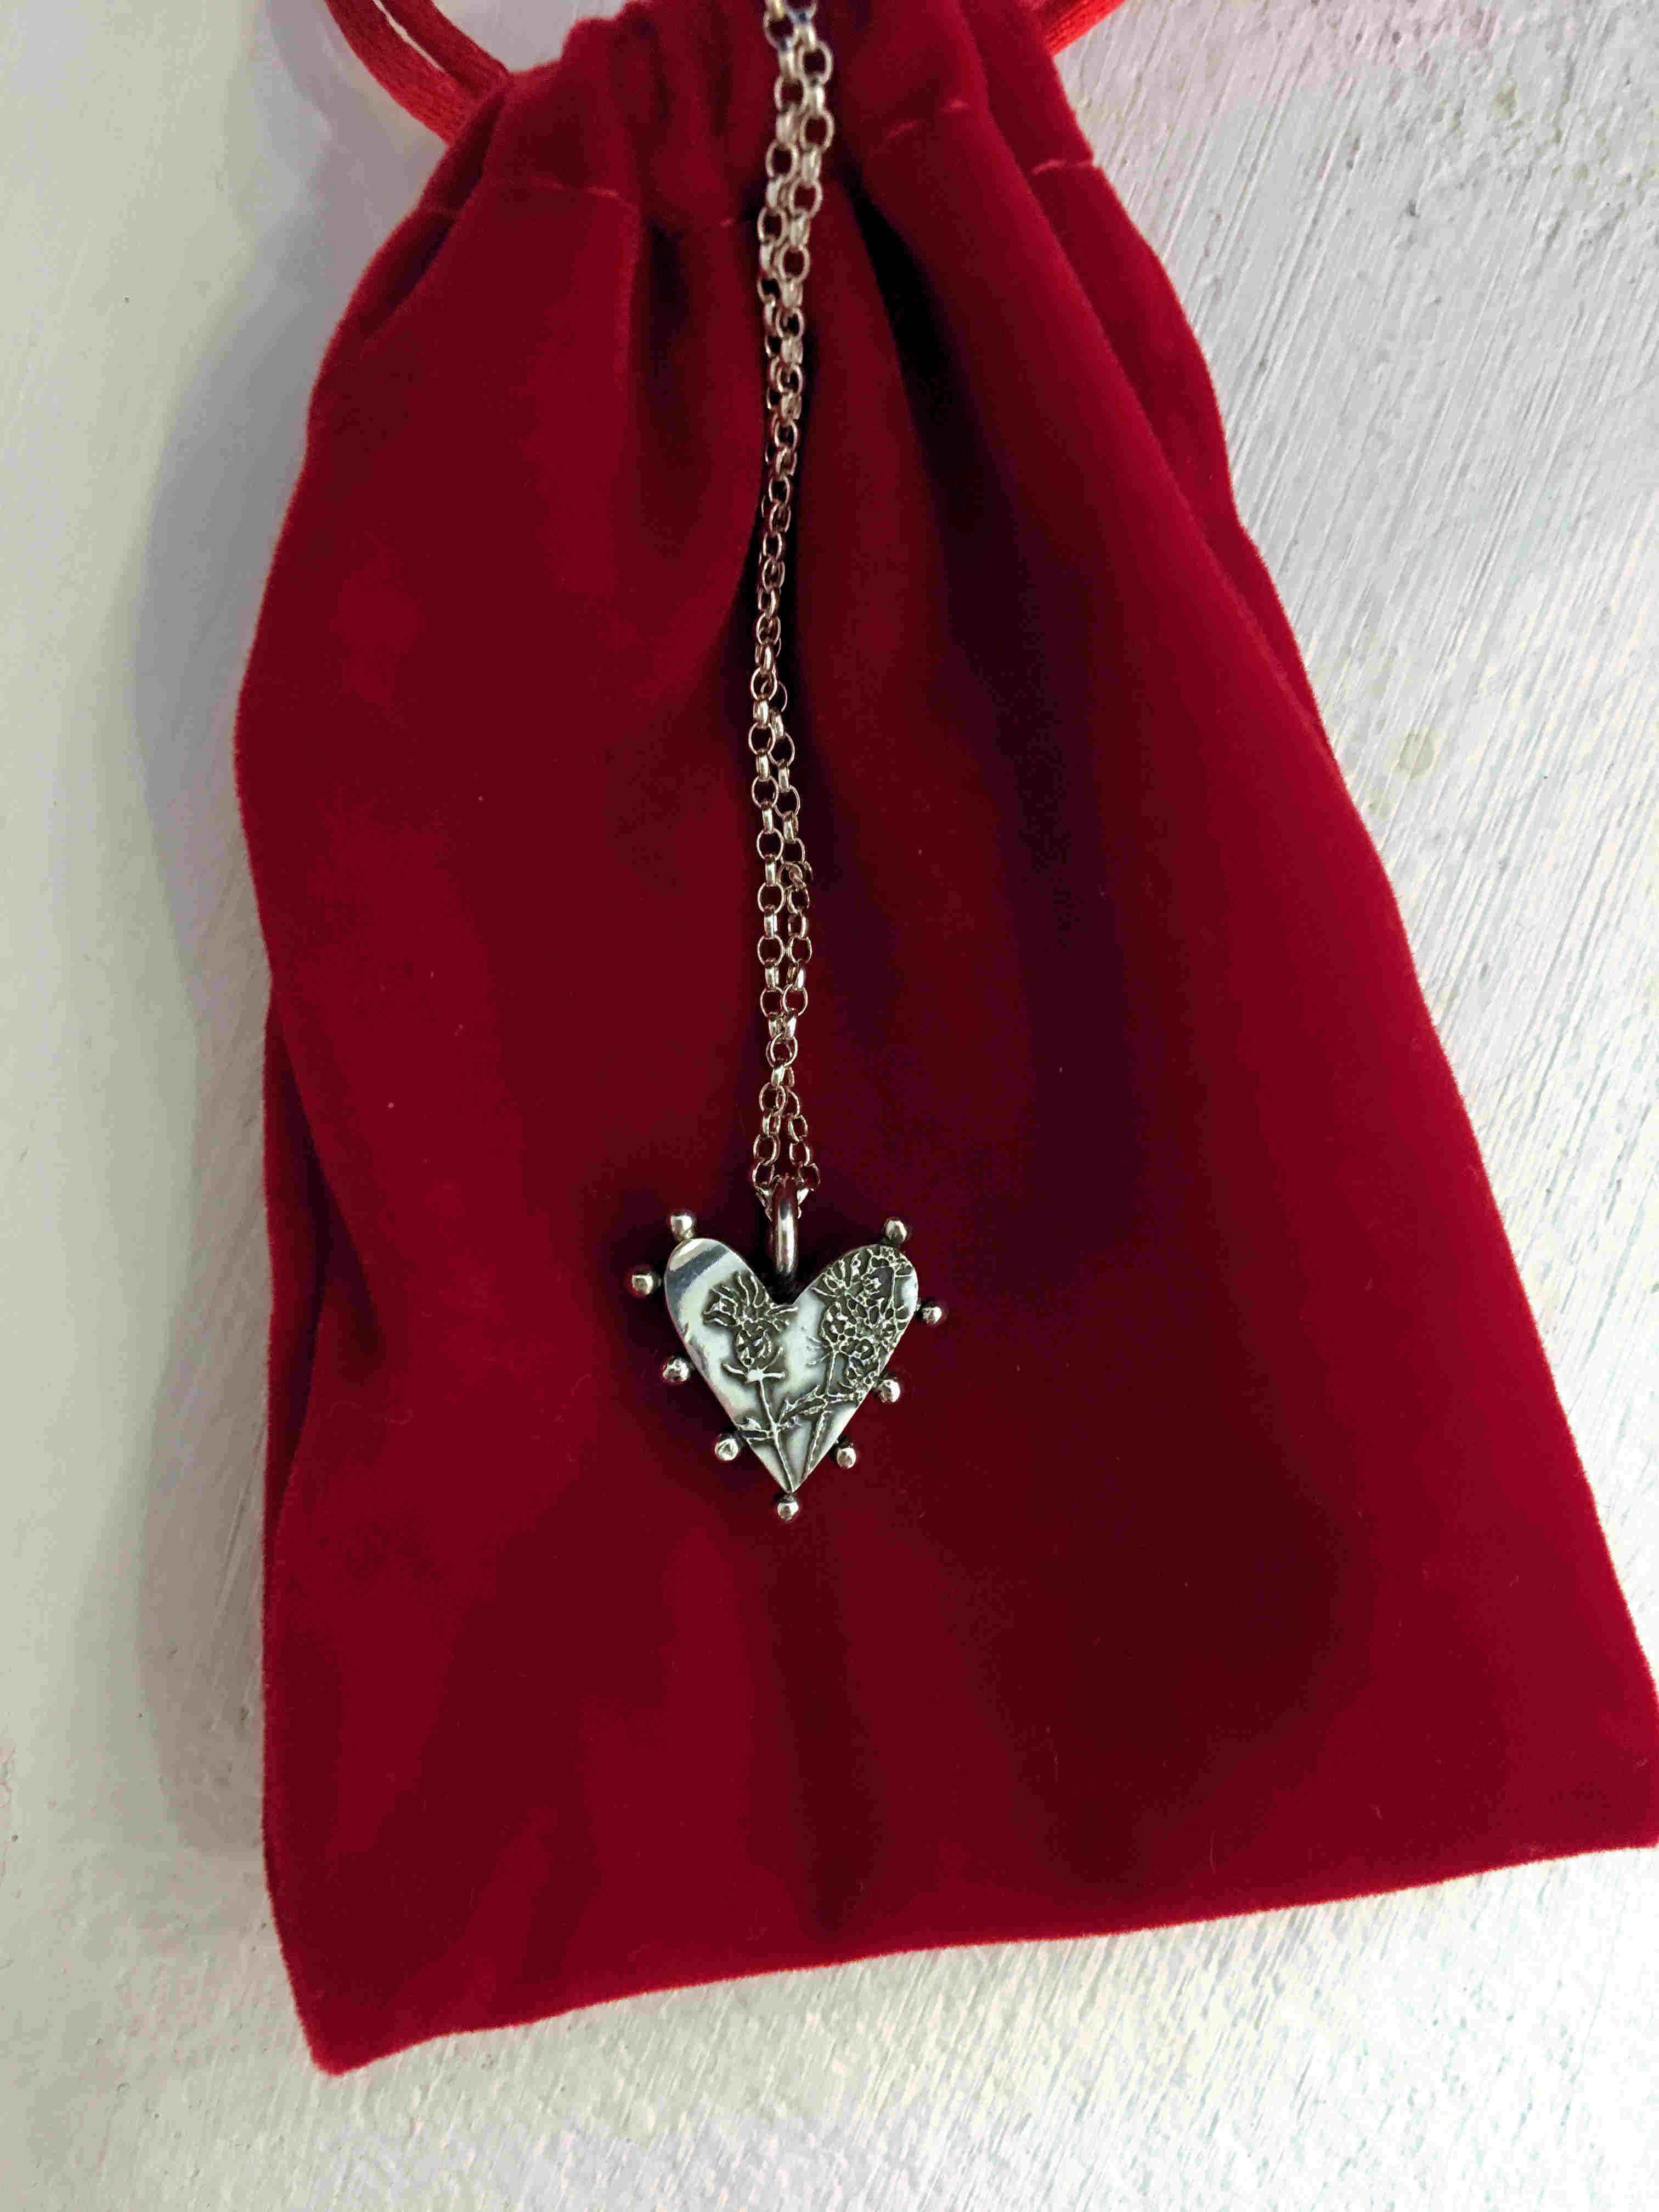 'Box Heart Necklace with Etched Thistles' by artist Carol Docherty